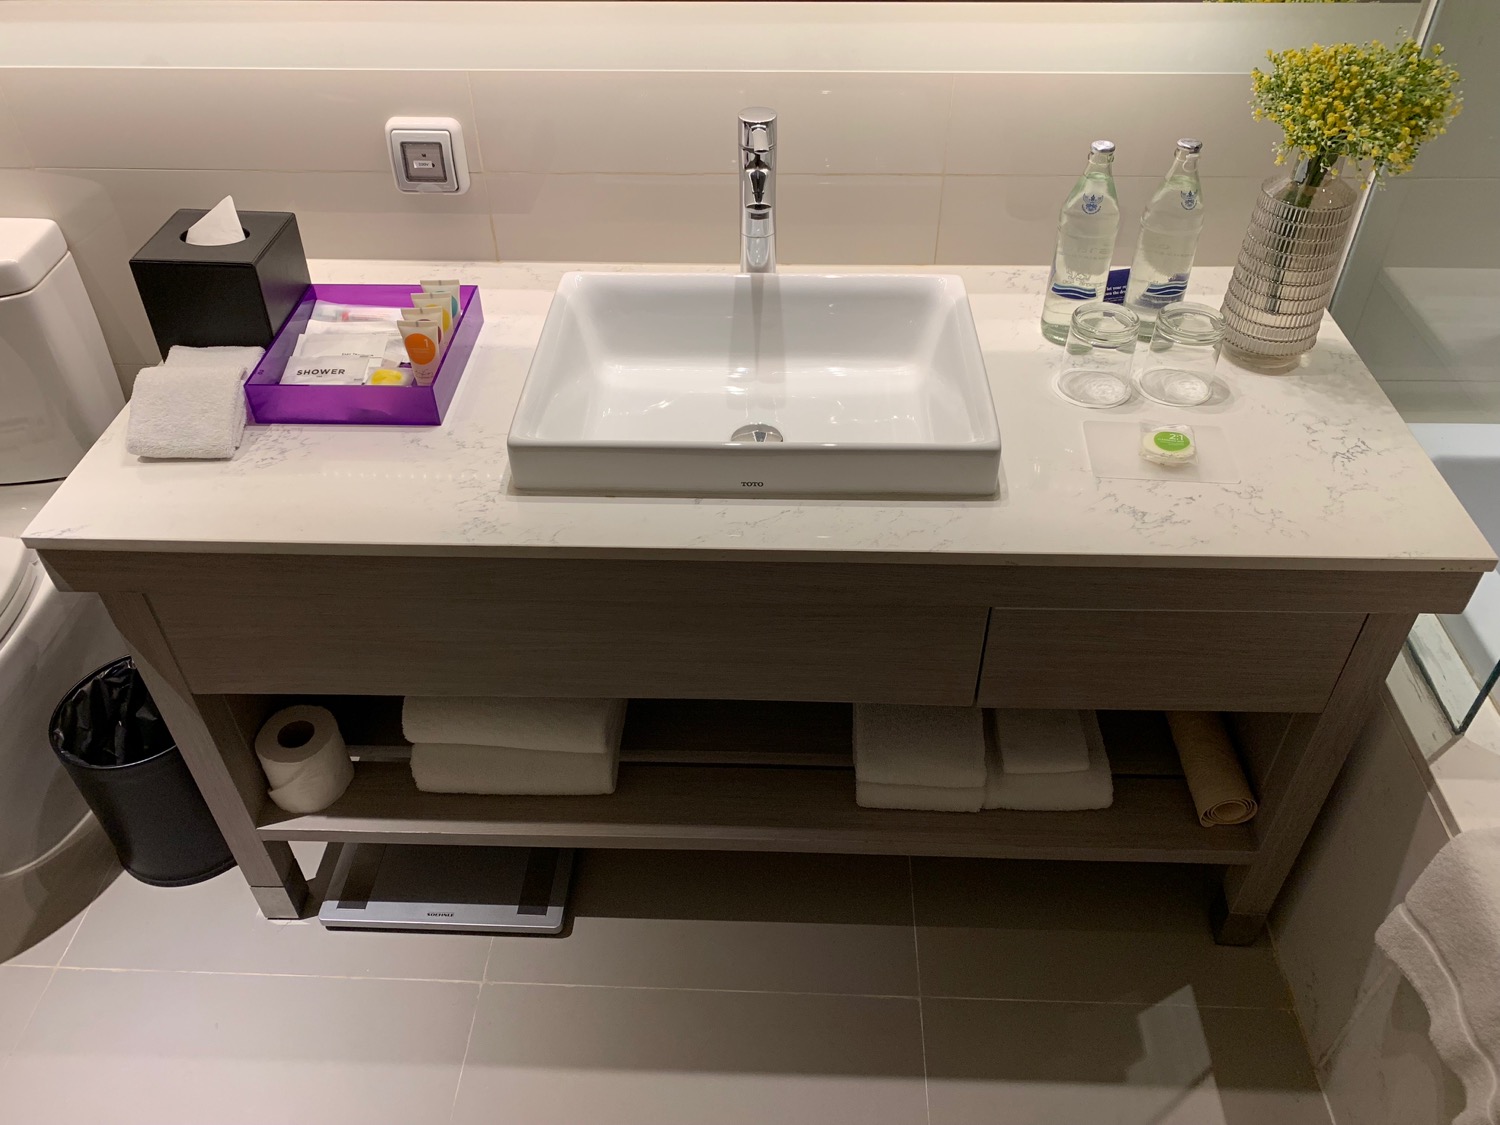 a sink and bottles on a counter